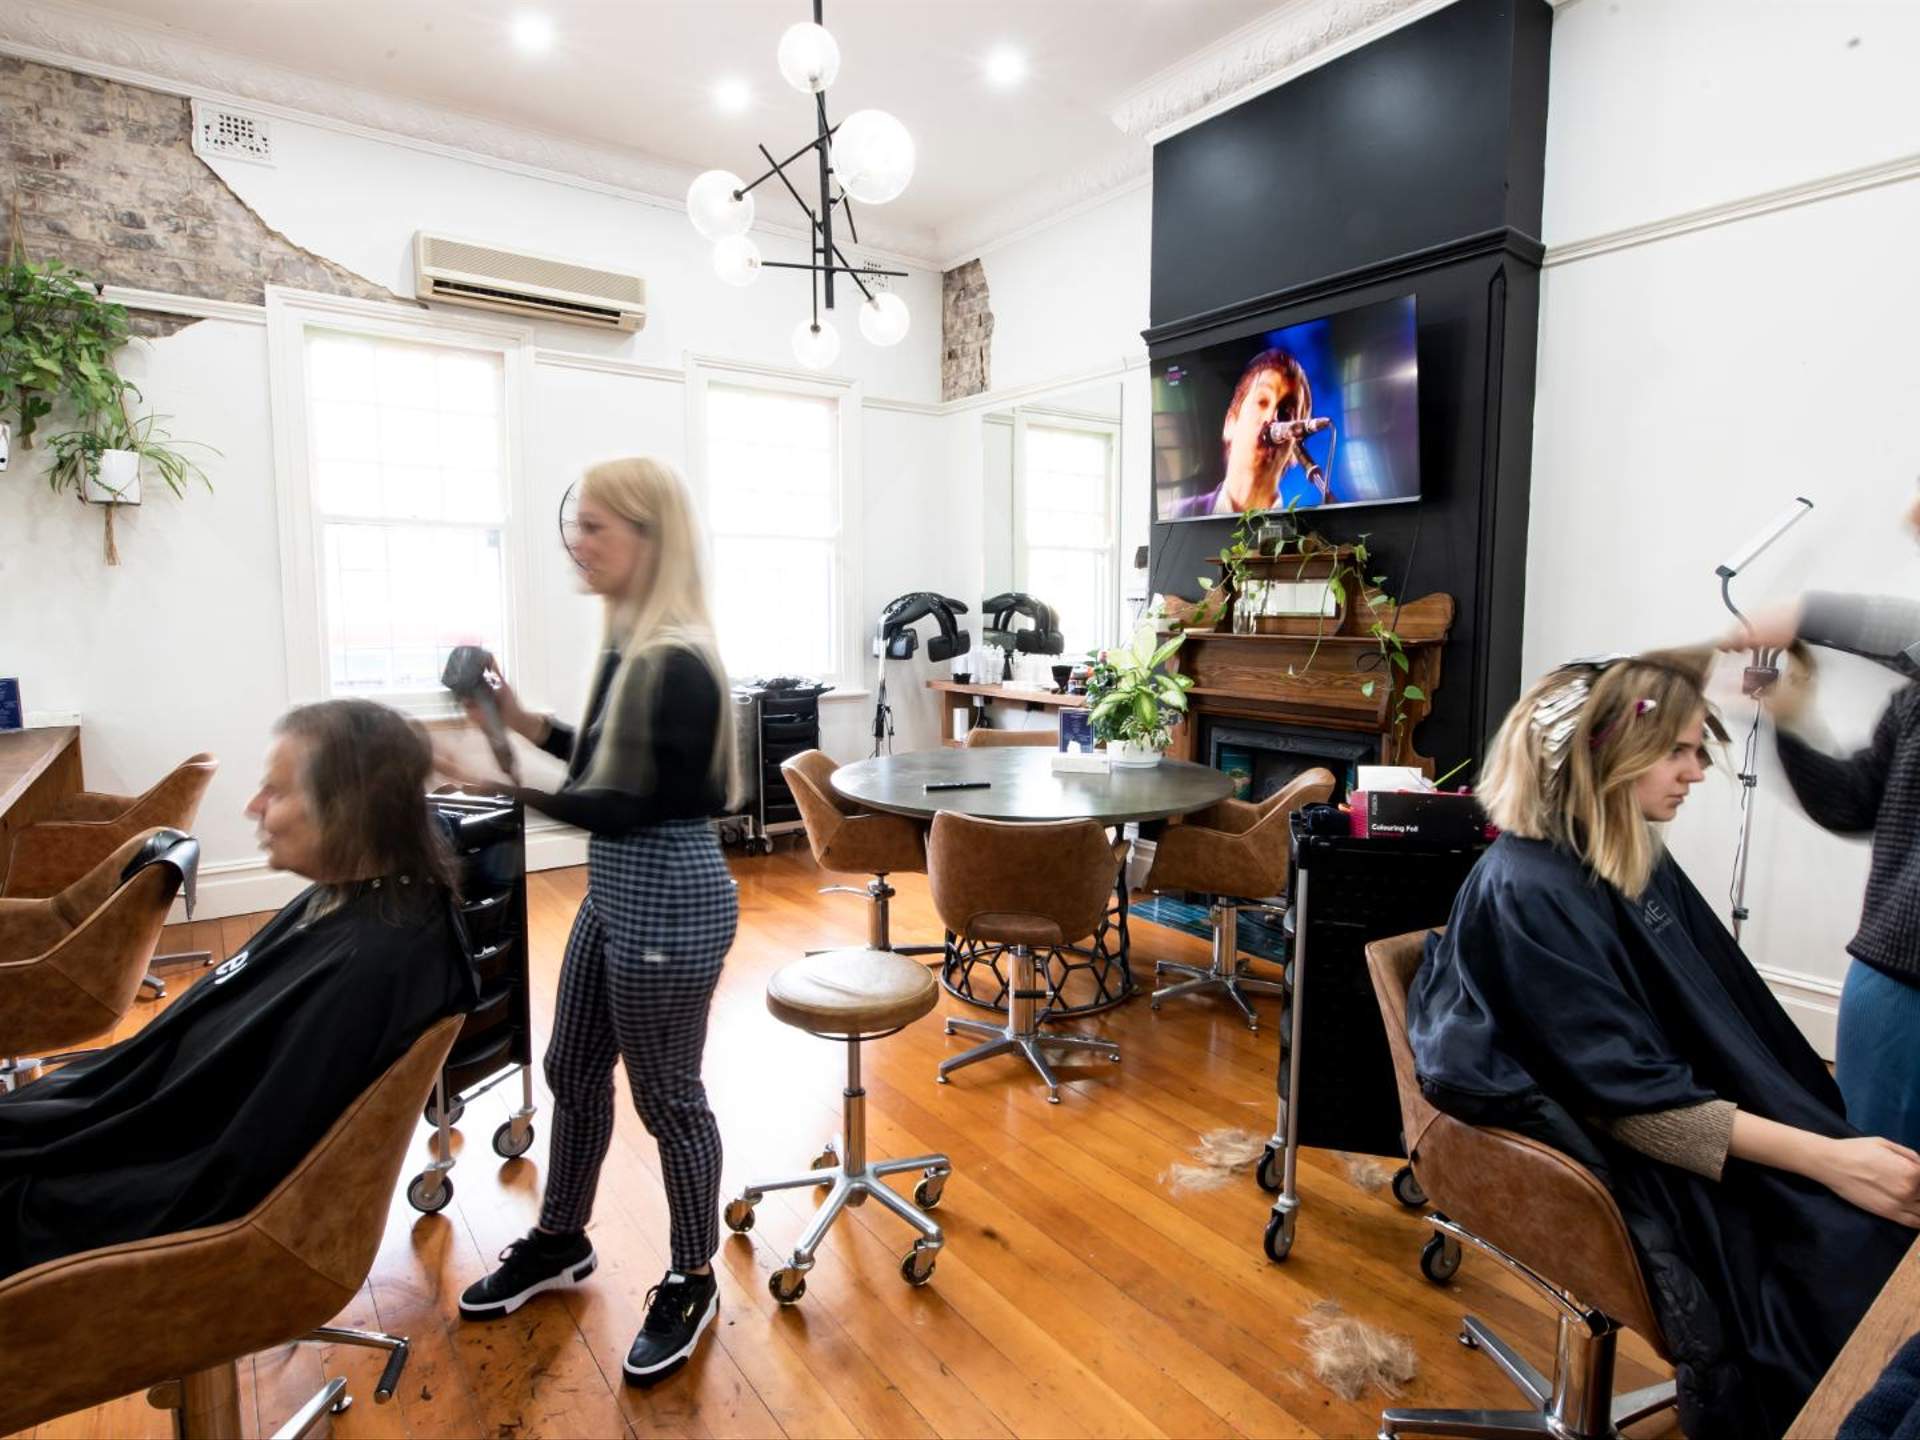 Sydney Hair Salons and Barbershops For When You Want to Look Your Best -  Concrete Playground